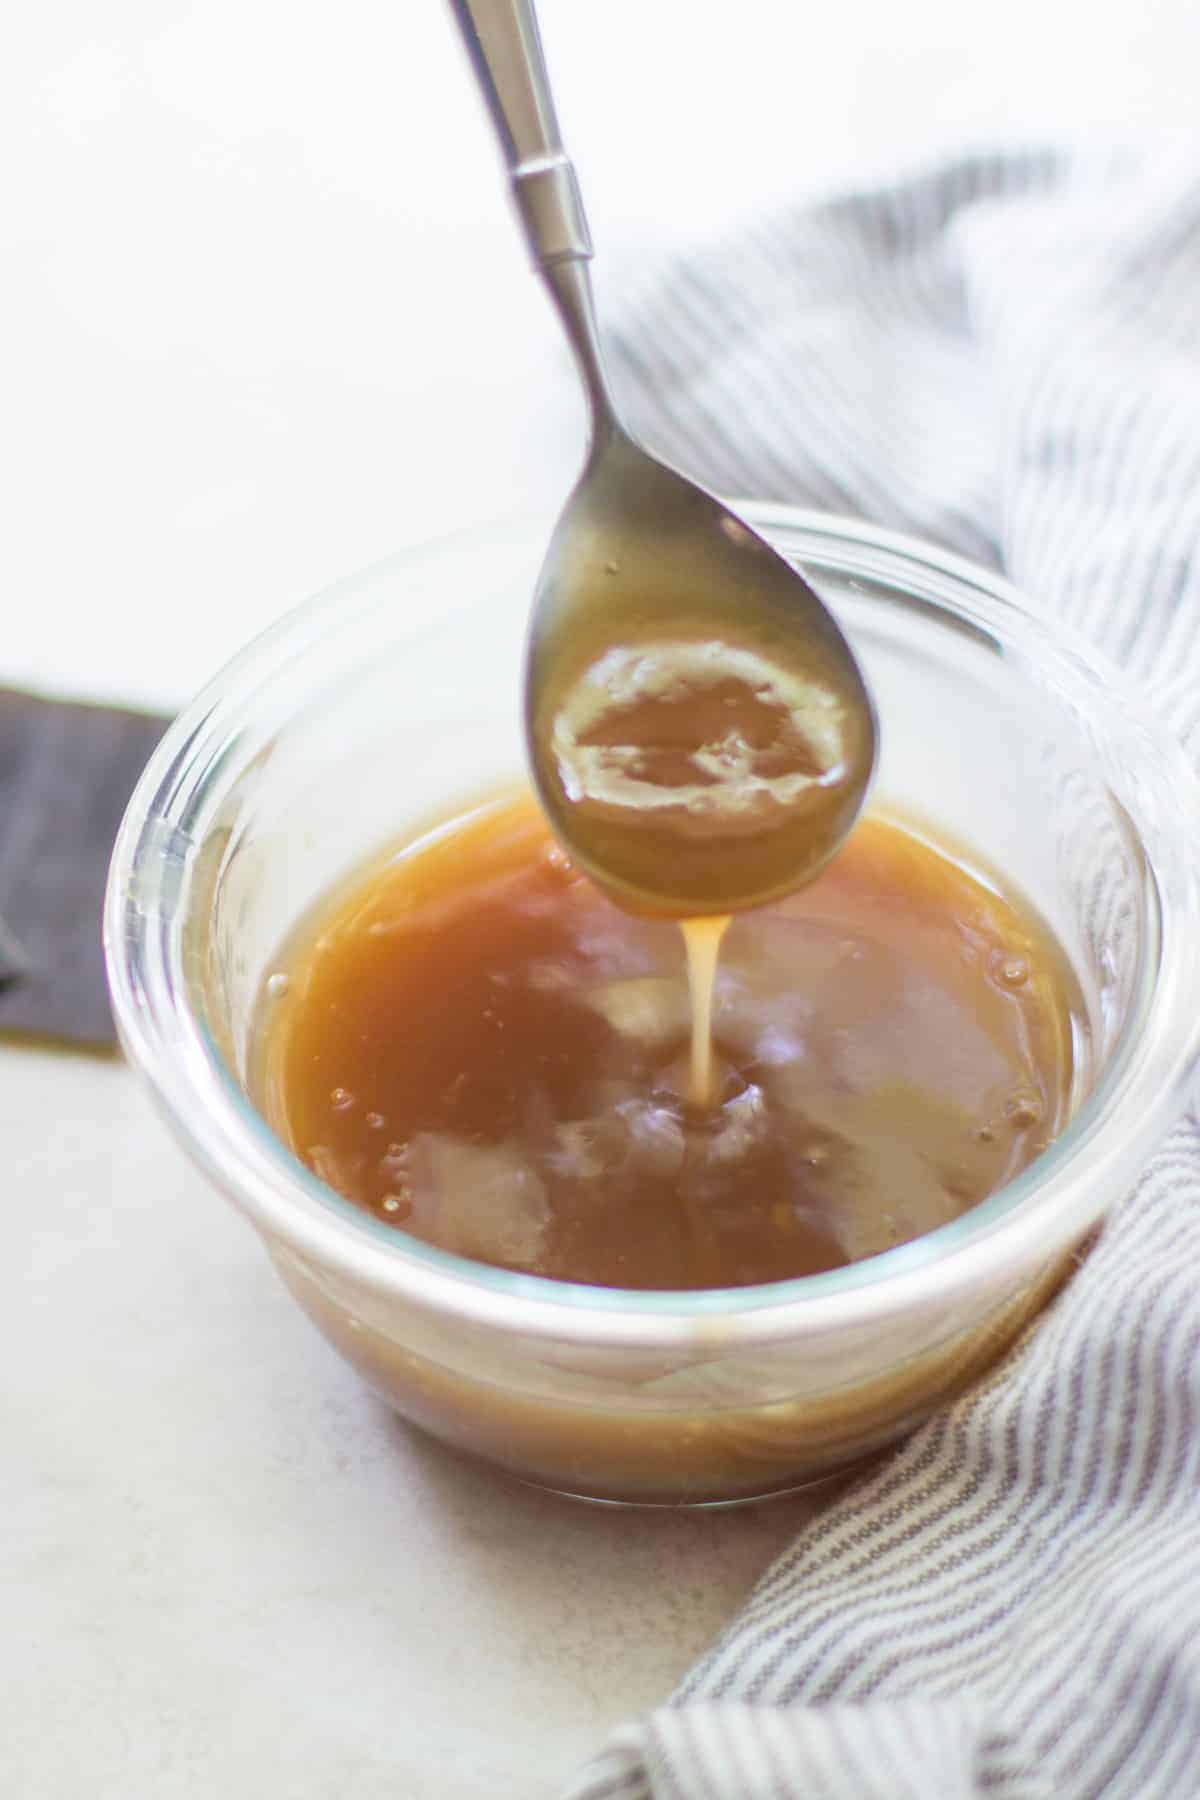 a close up shot of teriyaki sauce dripping from a spoon